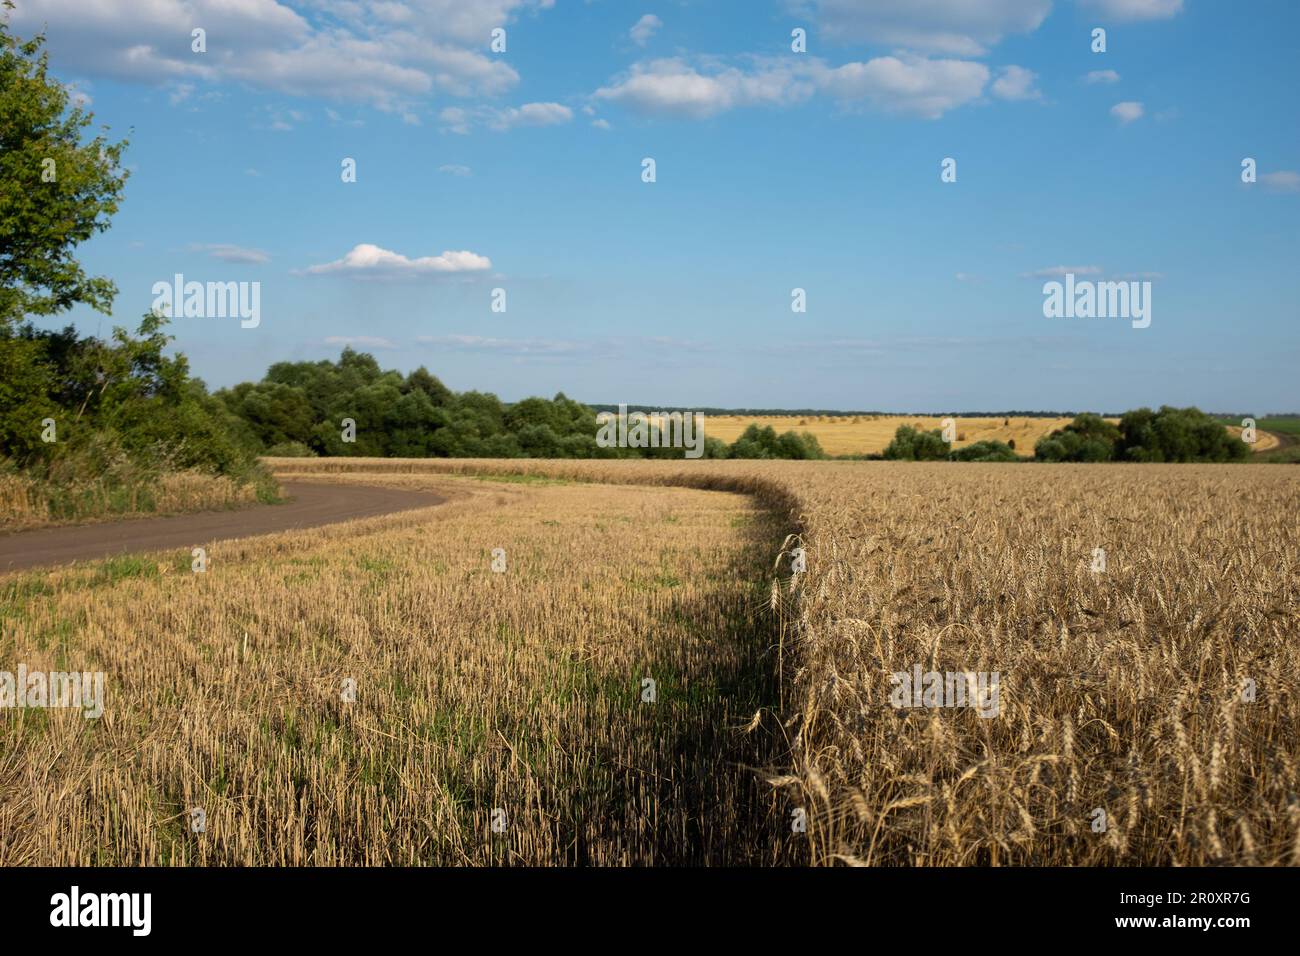 Wheat field in summer sunset against blue sky Stock Photo